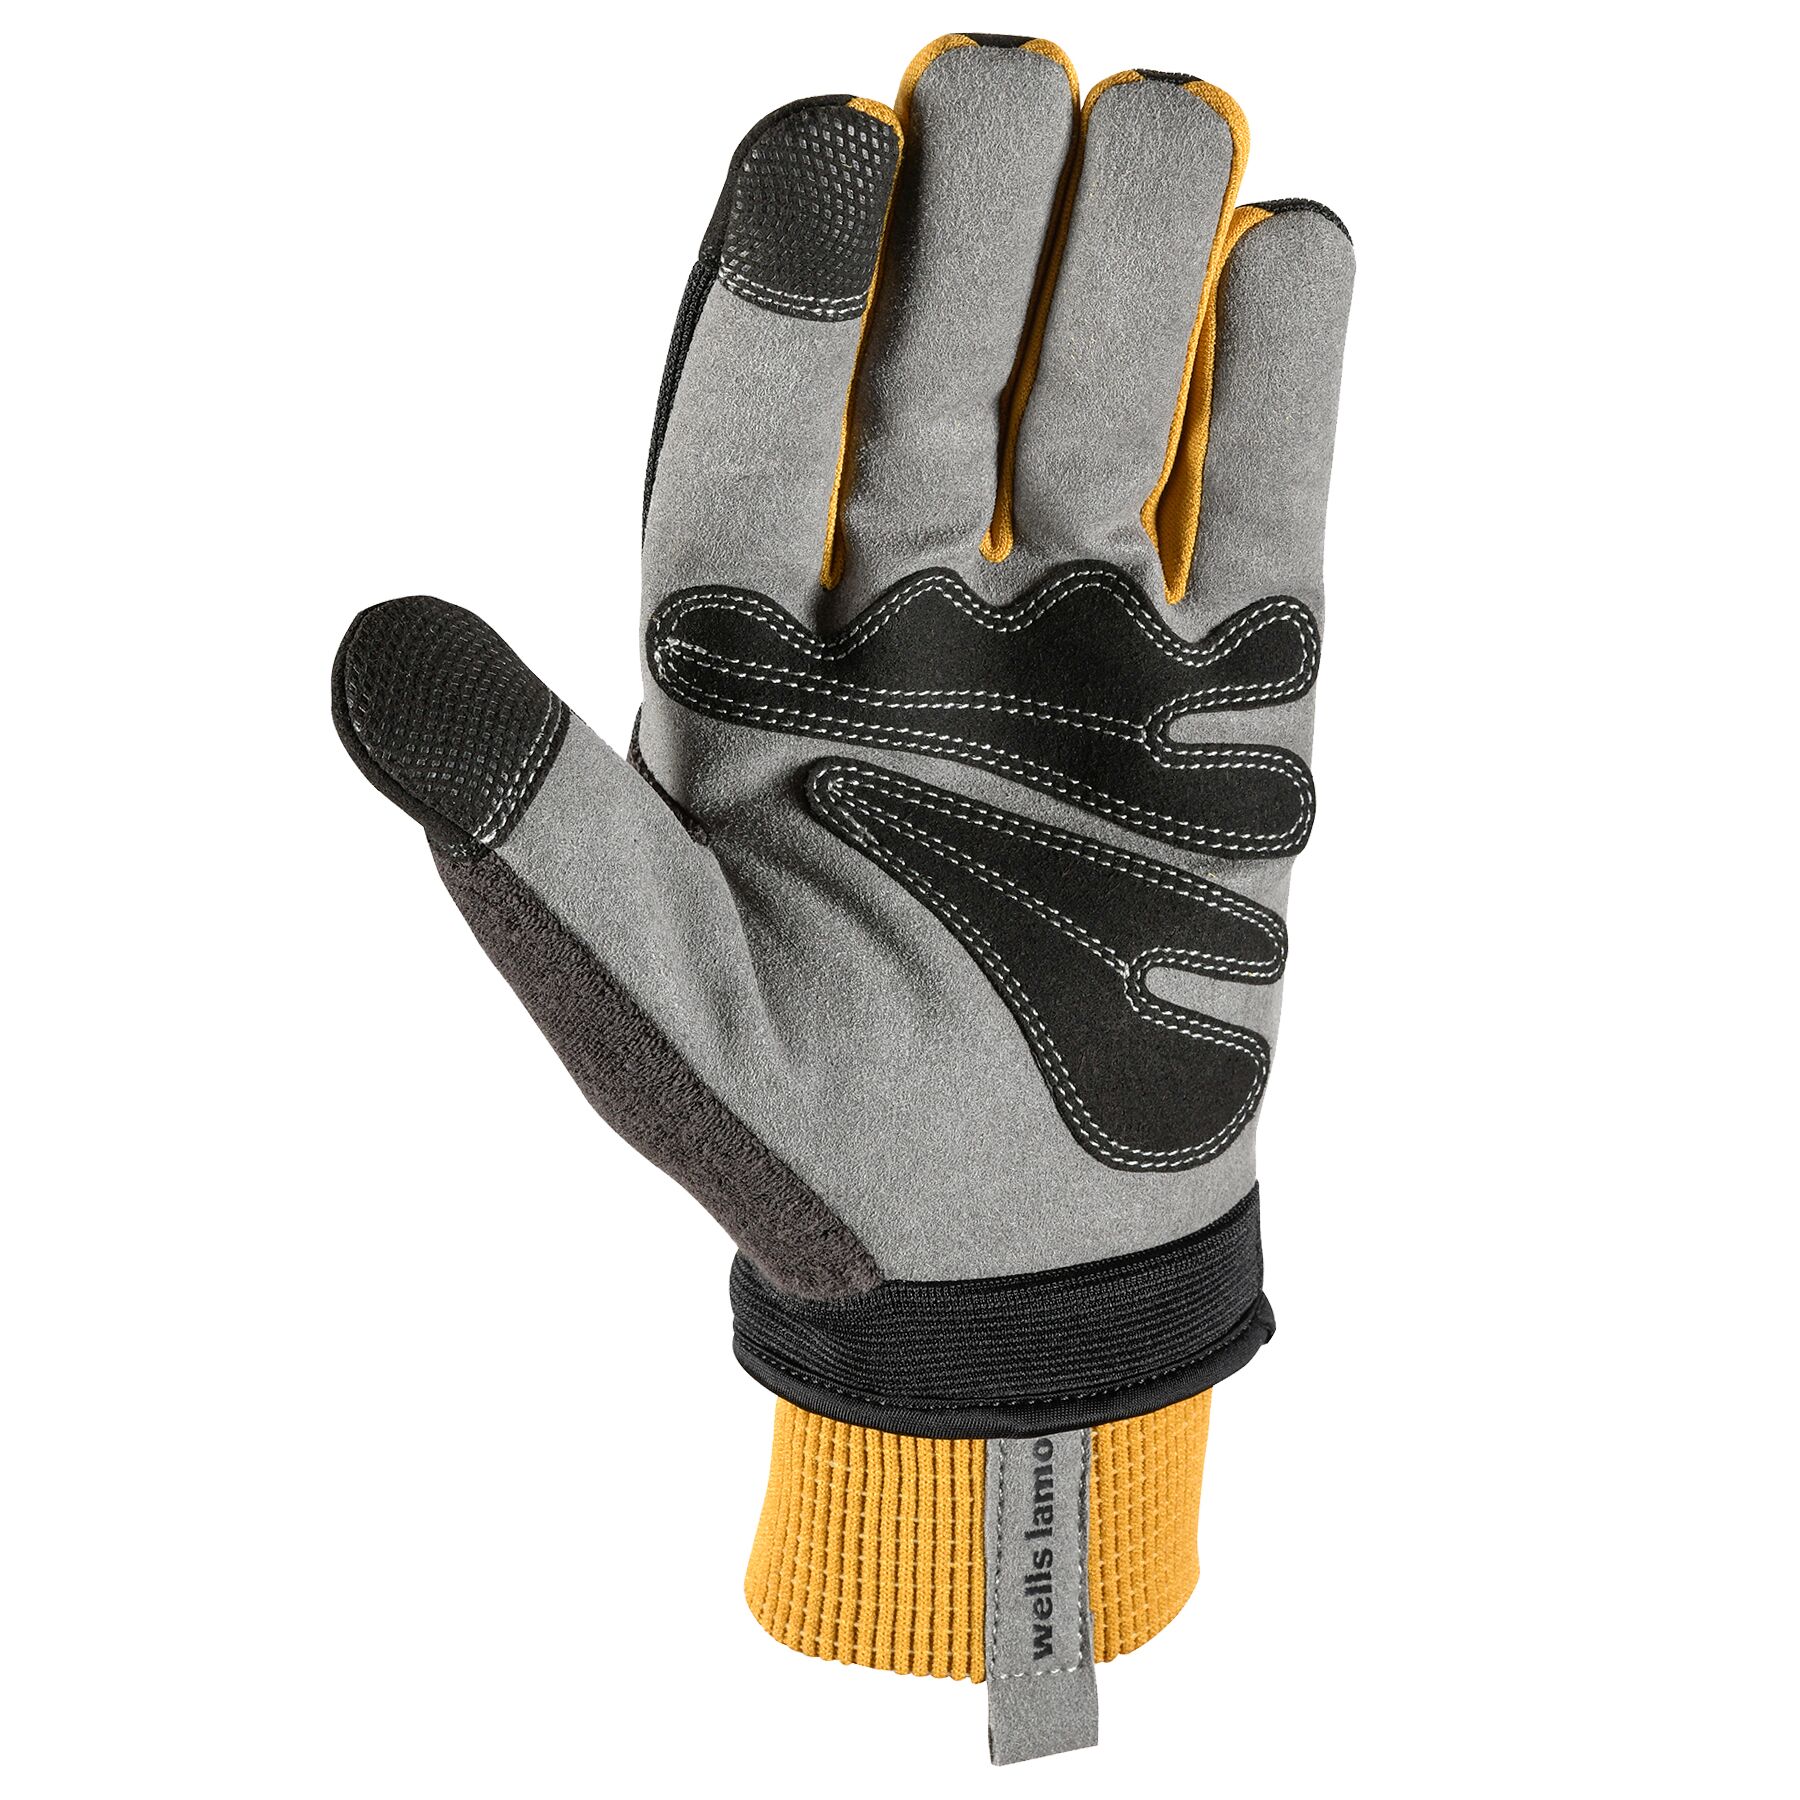 Men's FX3 Insulated Synthetic Leather Slip-On Cold Weather Work Gloves